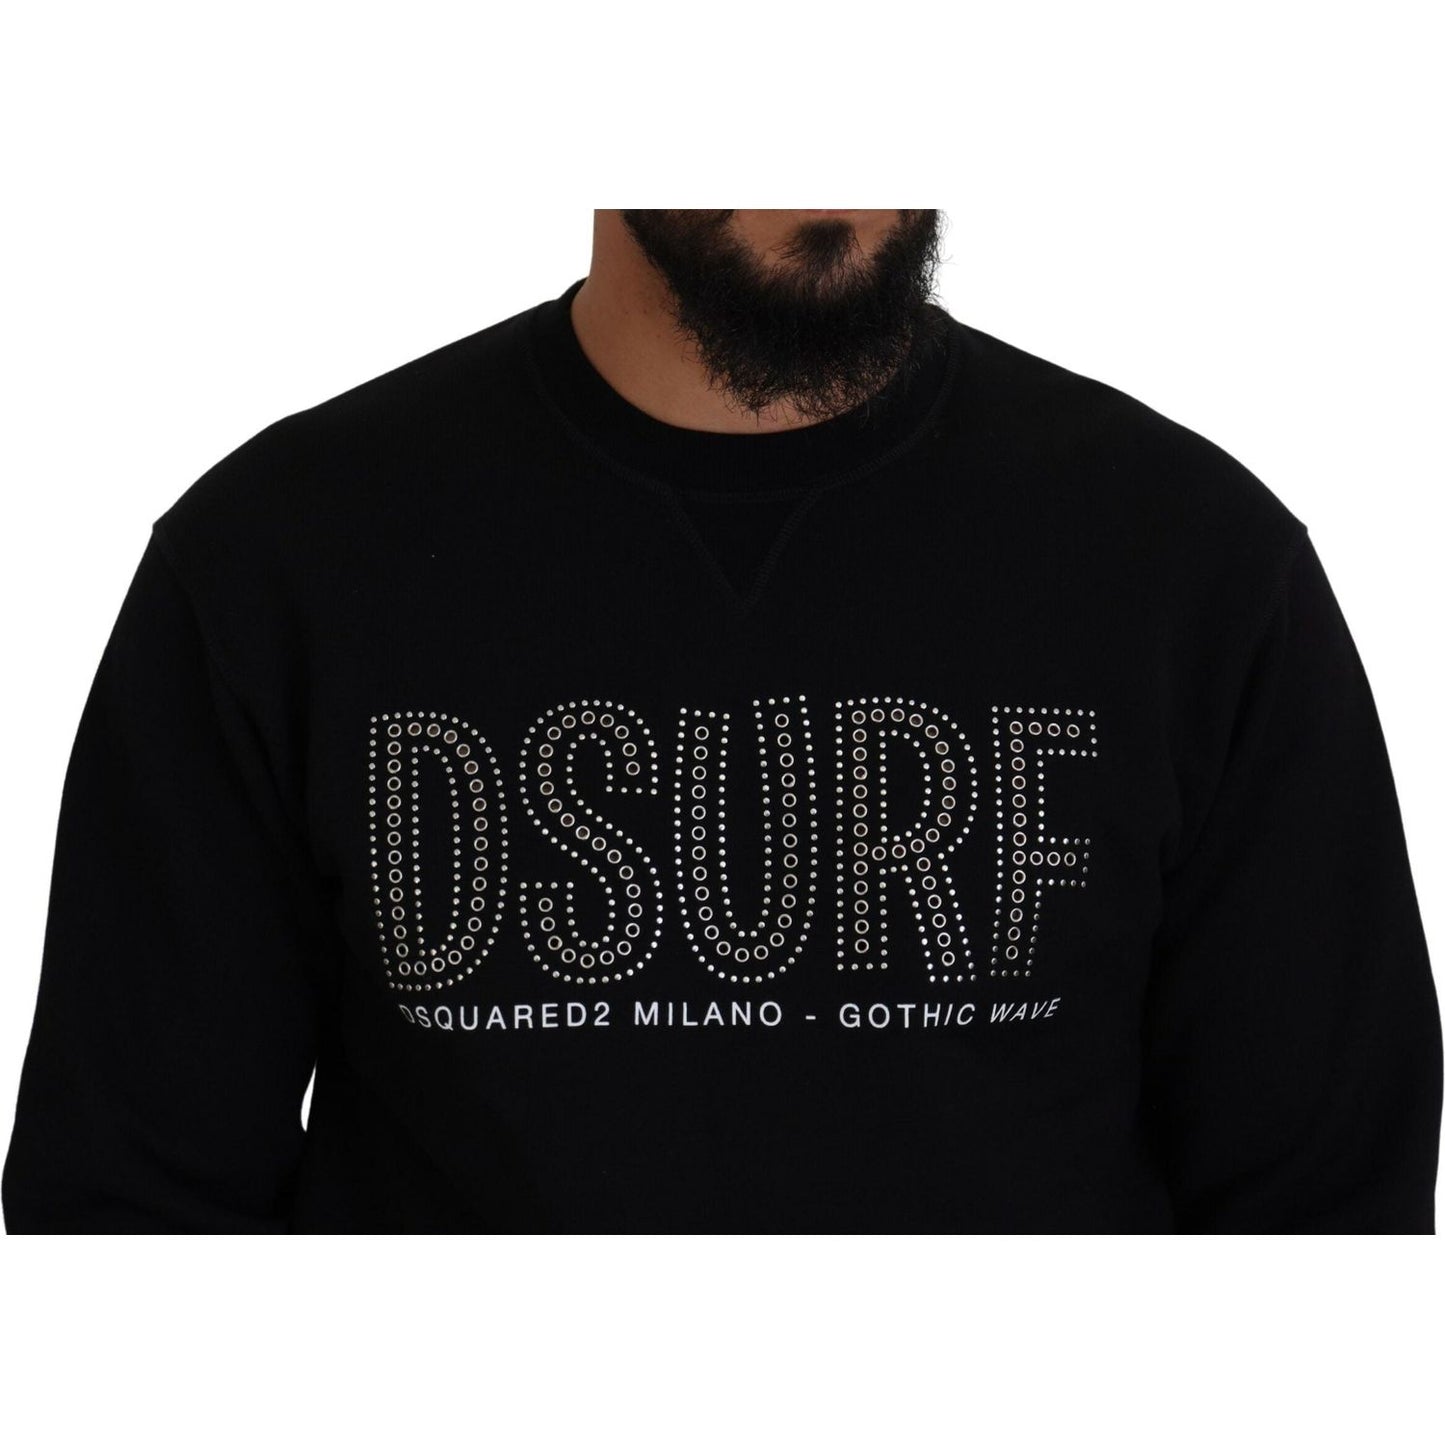 Dsquared² Black Cotton Printed Long Sleeves Pullover Sweater black-cotton-printed-long-sleeves-pullover-sweater